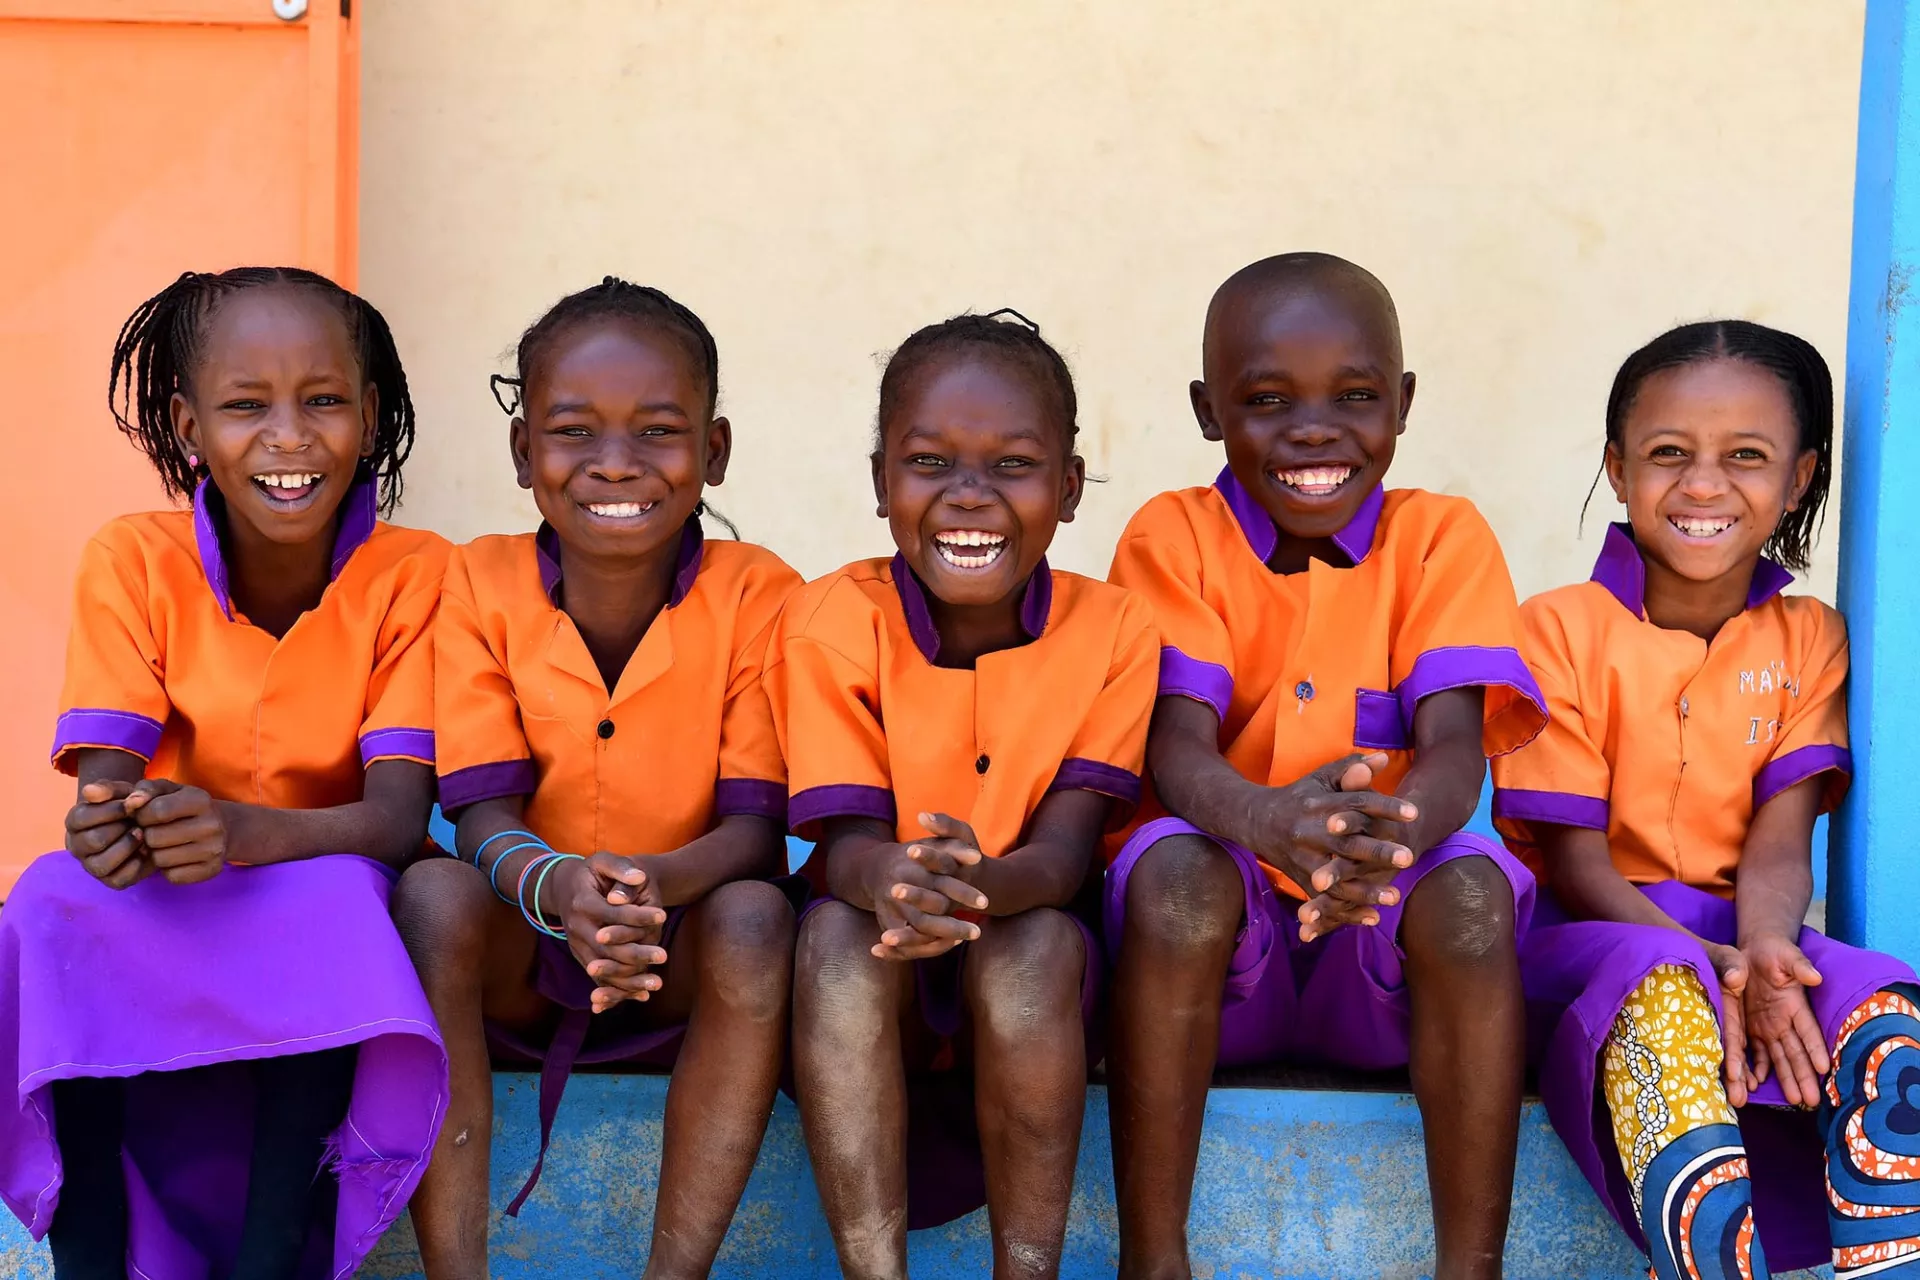 A group of children pose for a photo at the playground of their primary school in Cameroon